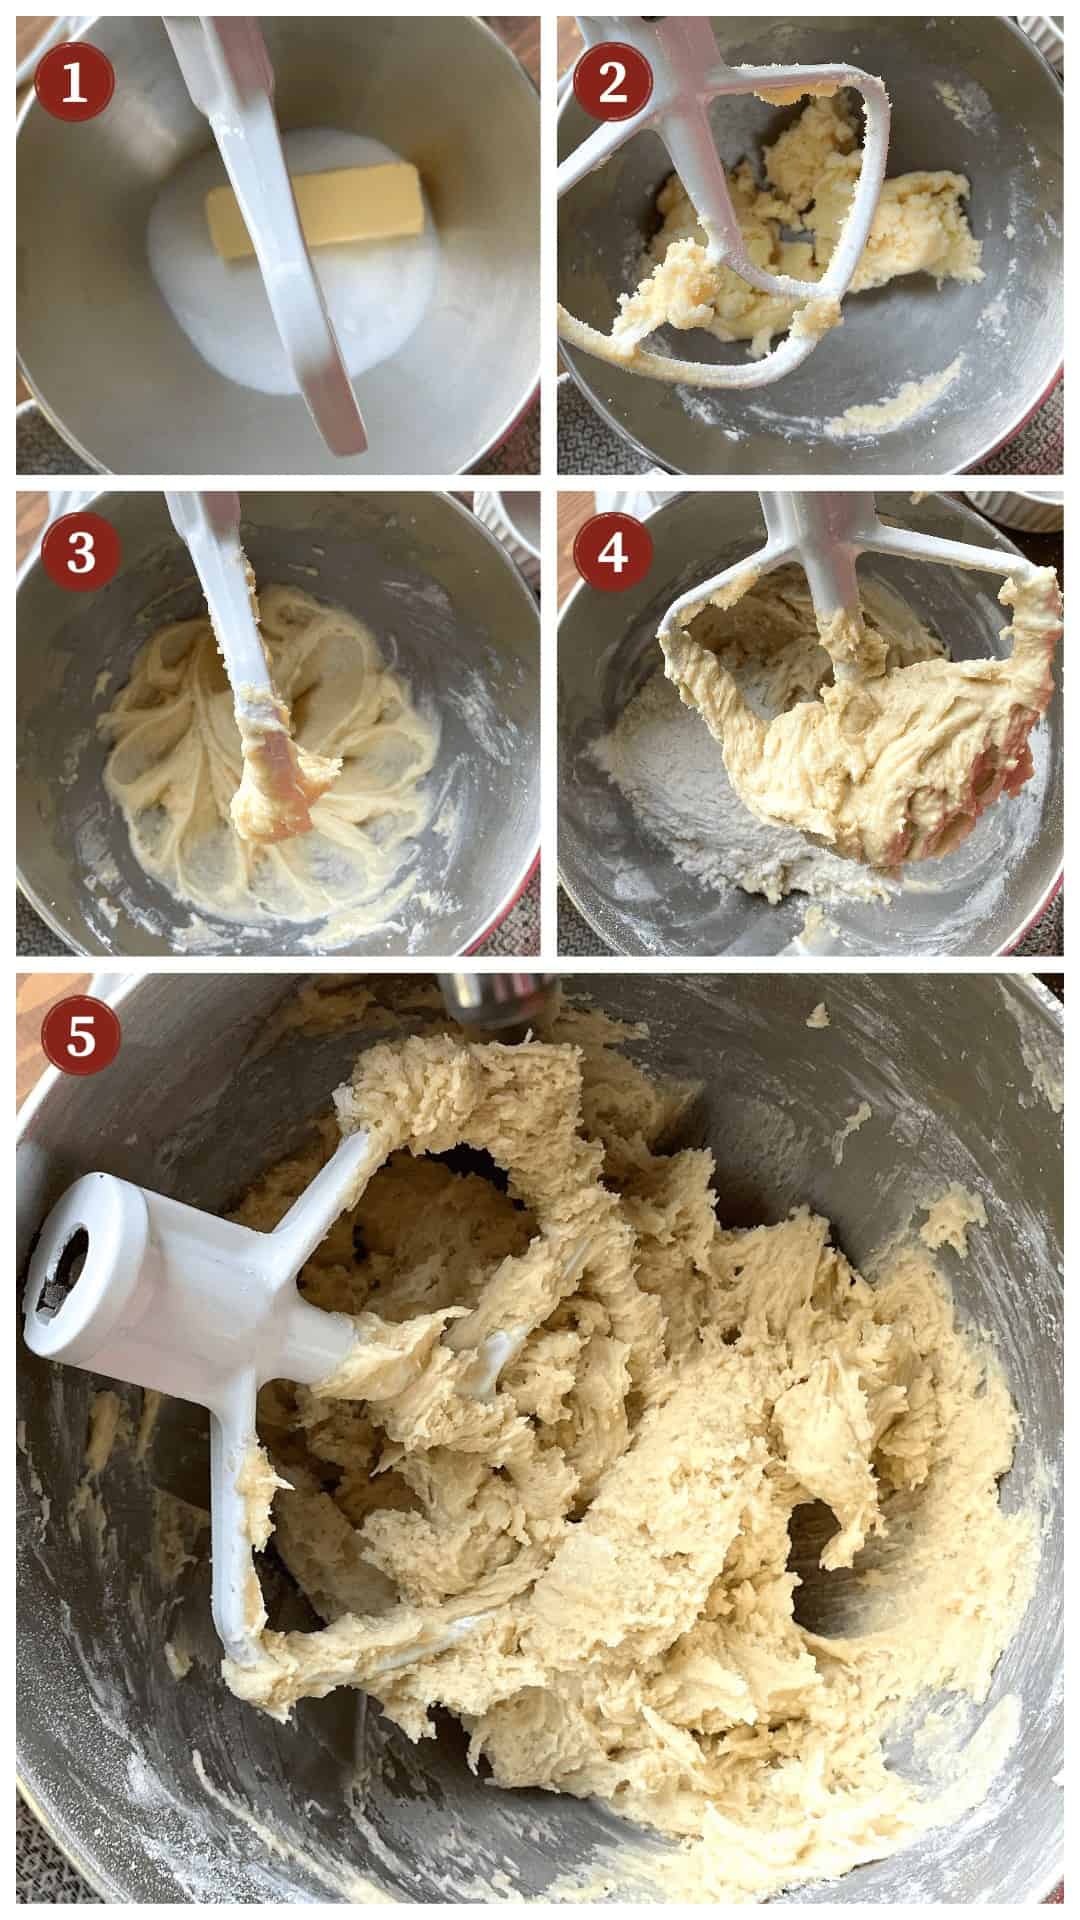 A collage of images showing how to make buttermilk cookies, steps 1 - 5.